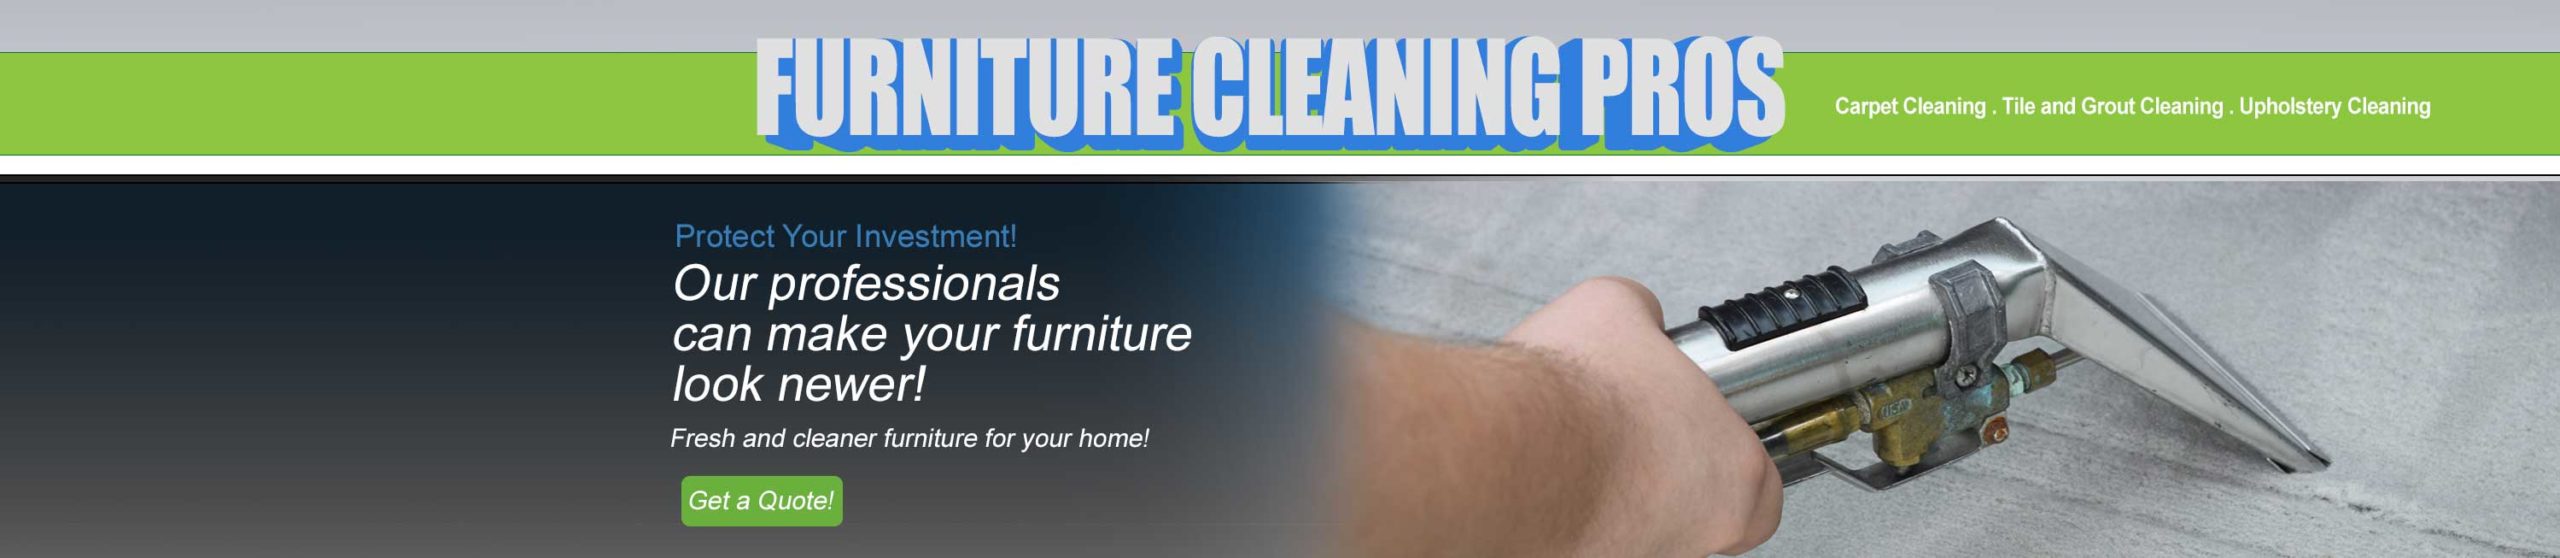 Furniture and upholstery cleaning in Goodyear AZ